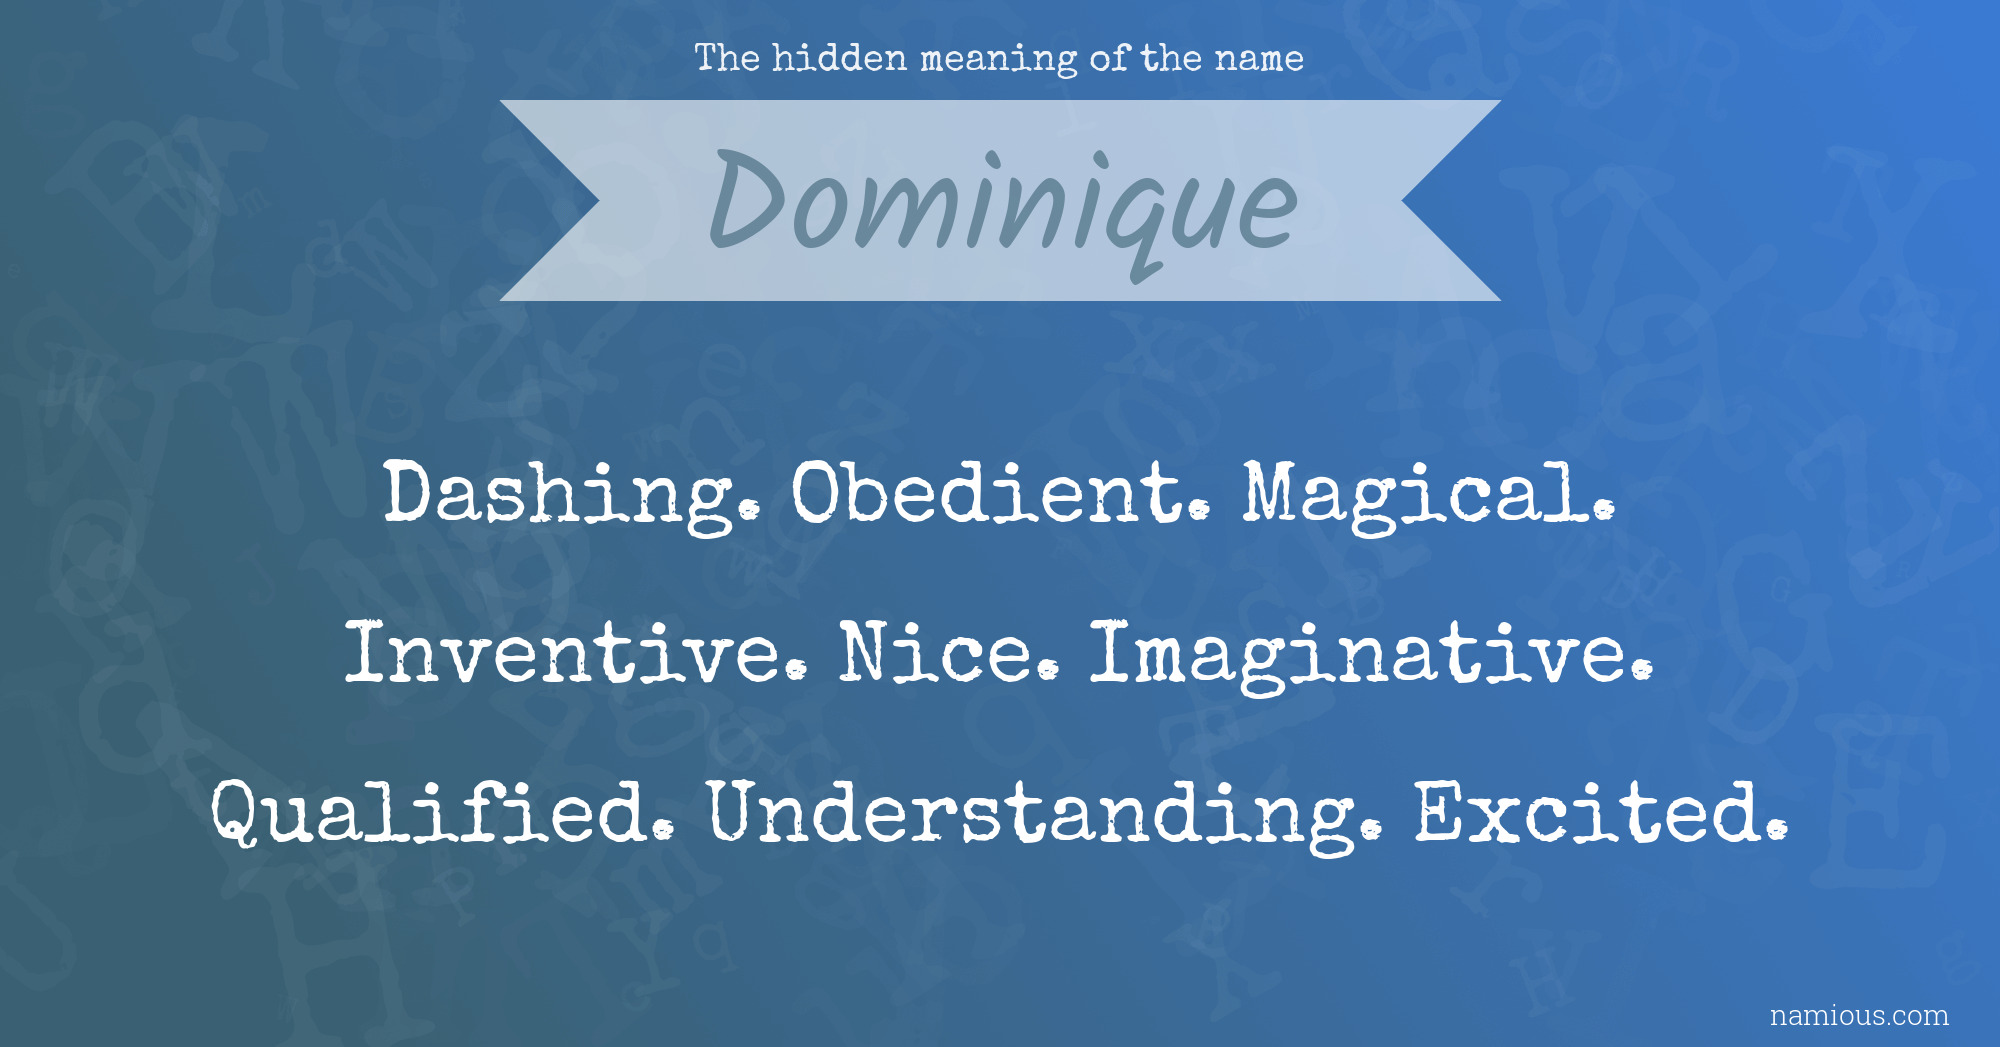 The hidden meaning of the name Dominique